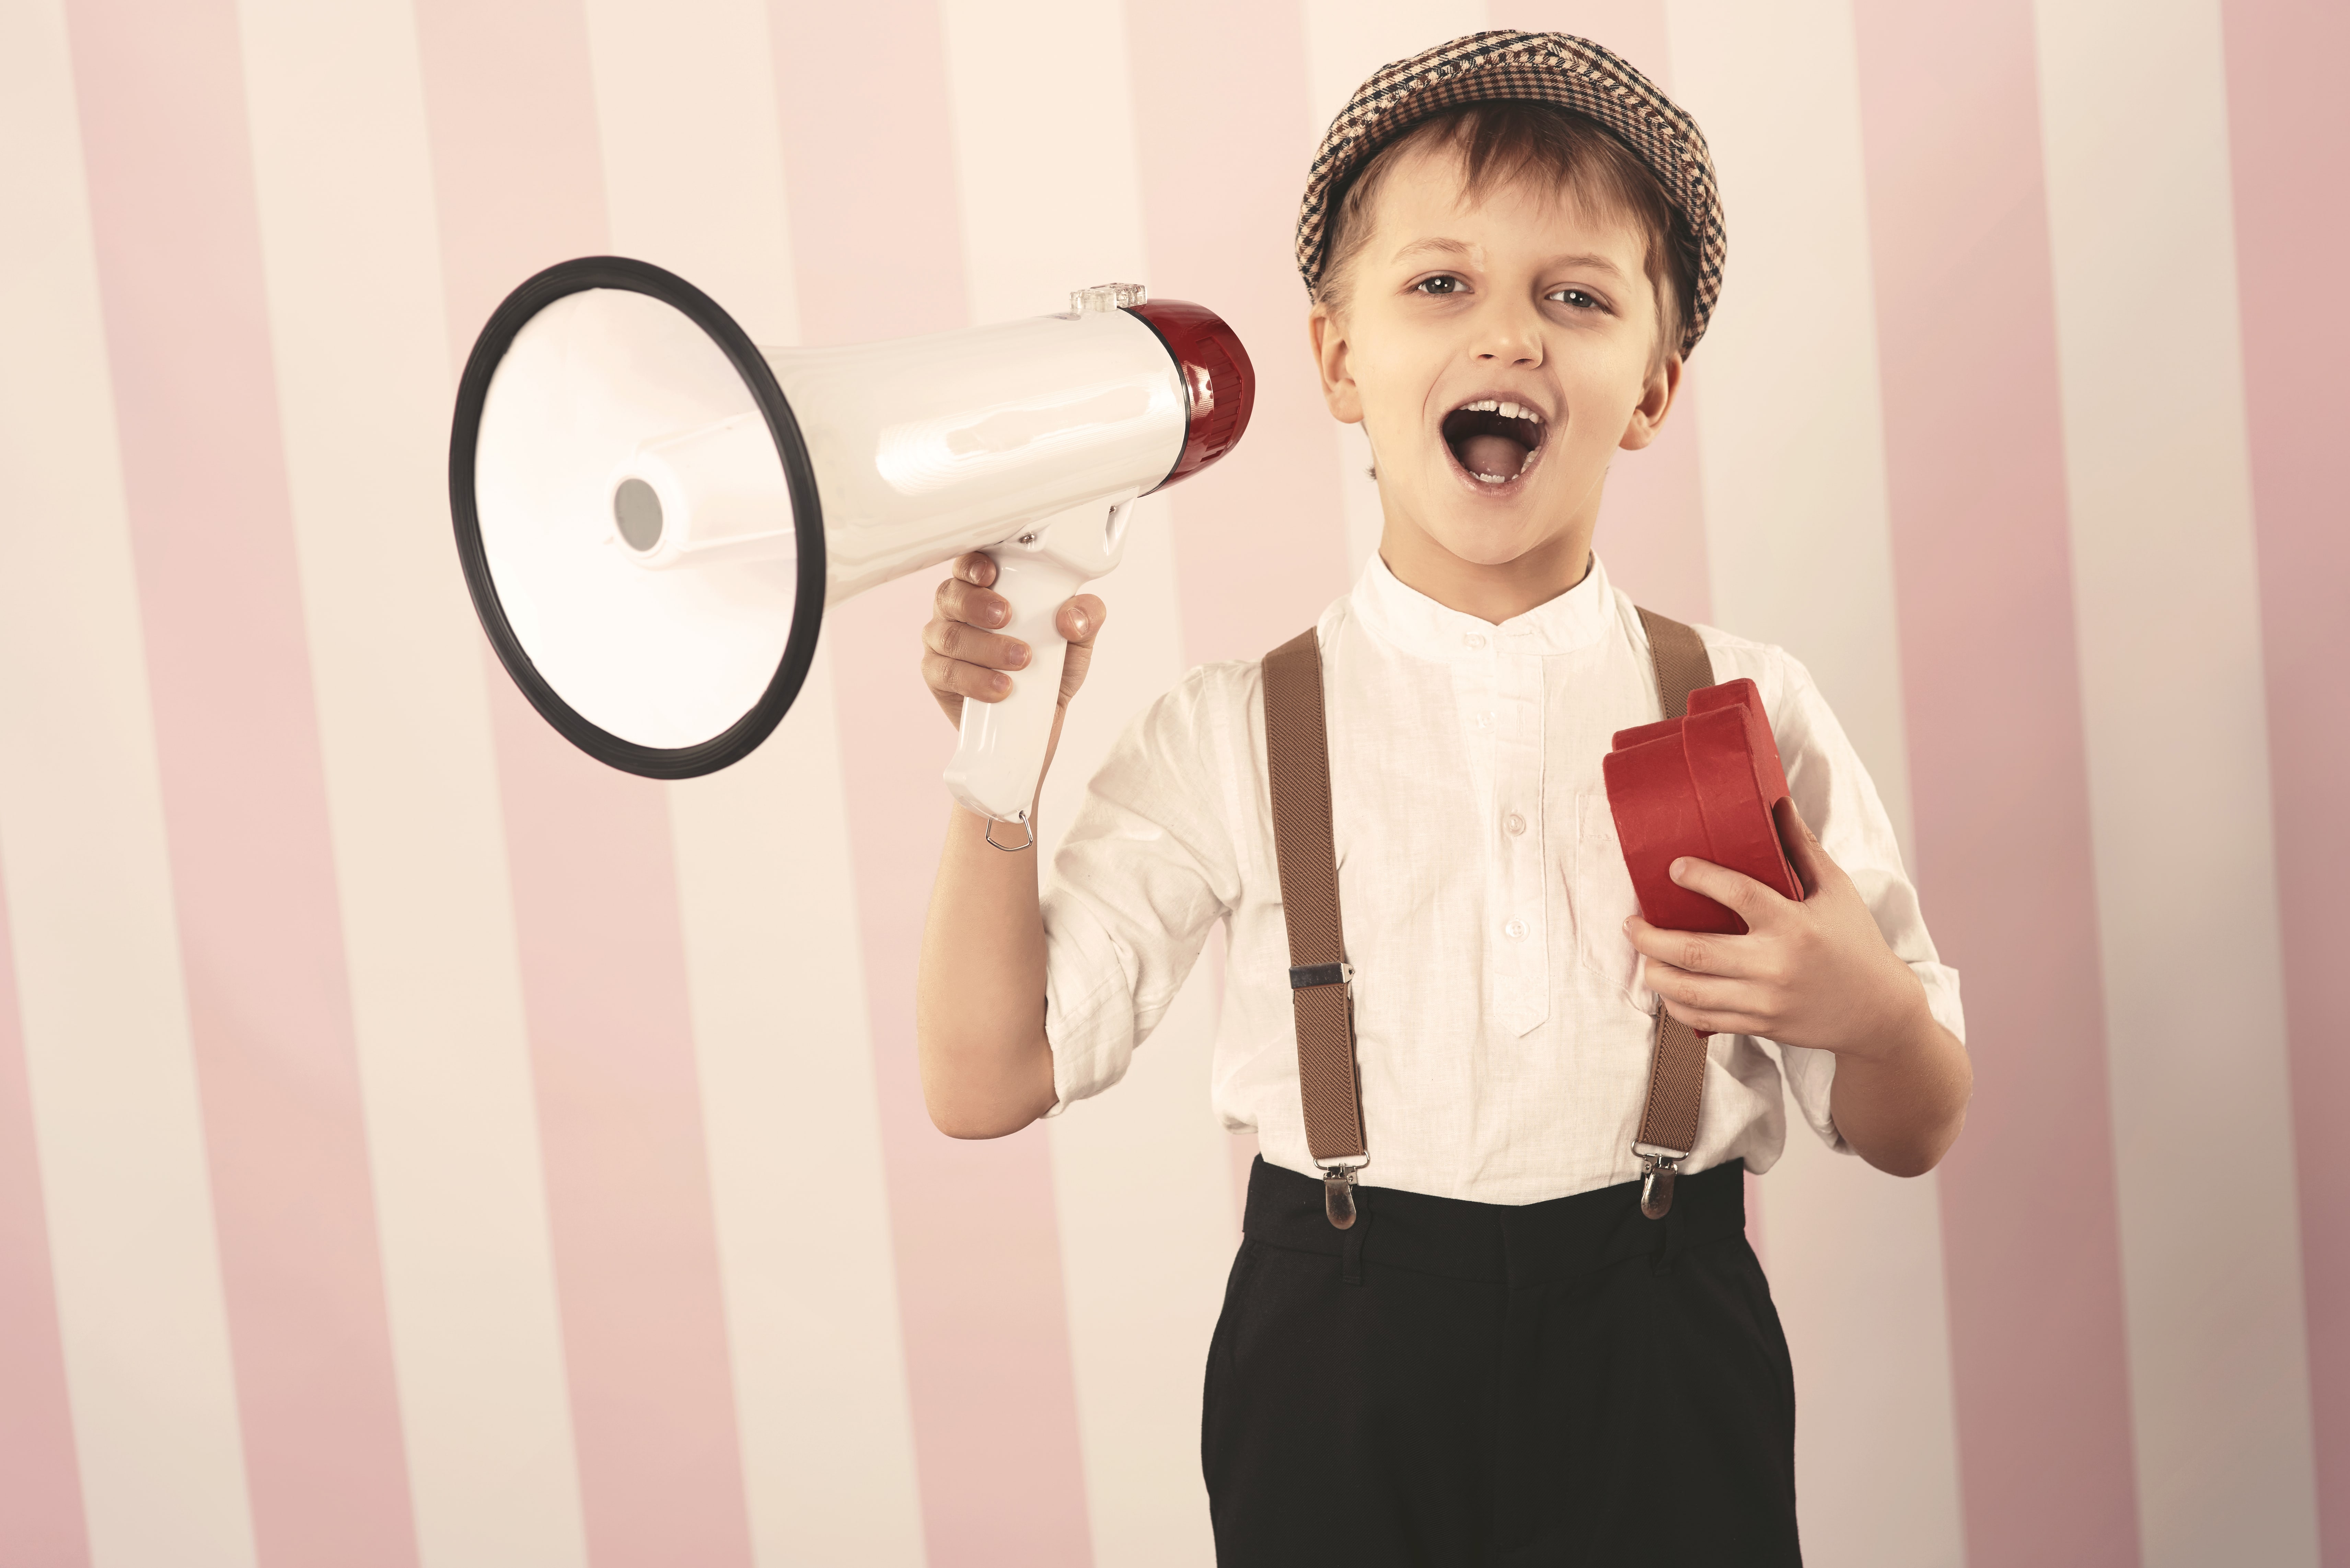 Public Speaking Classes For Kids: A Complete Guide